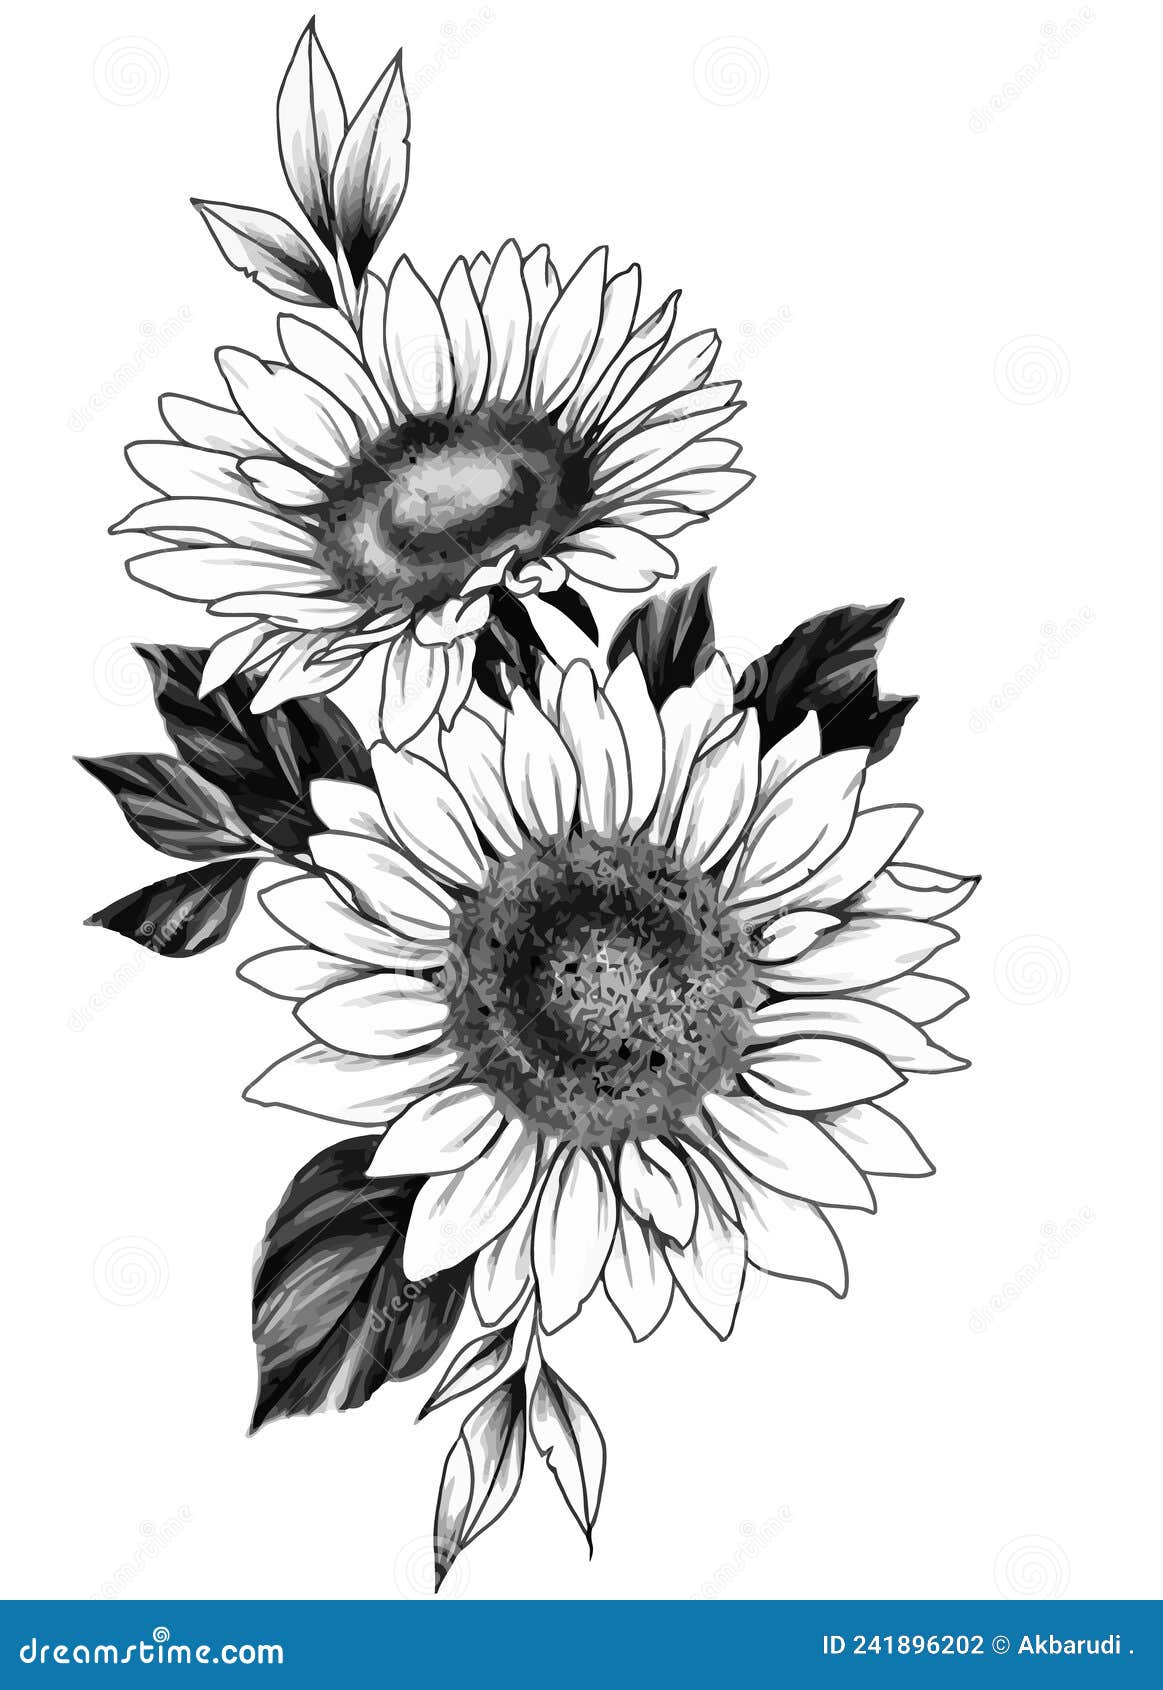 19 Sunflower Drawing Ideas for All Skill Levels - Beautiful Dawn Designs